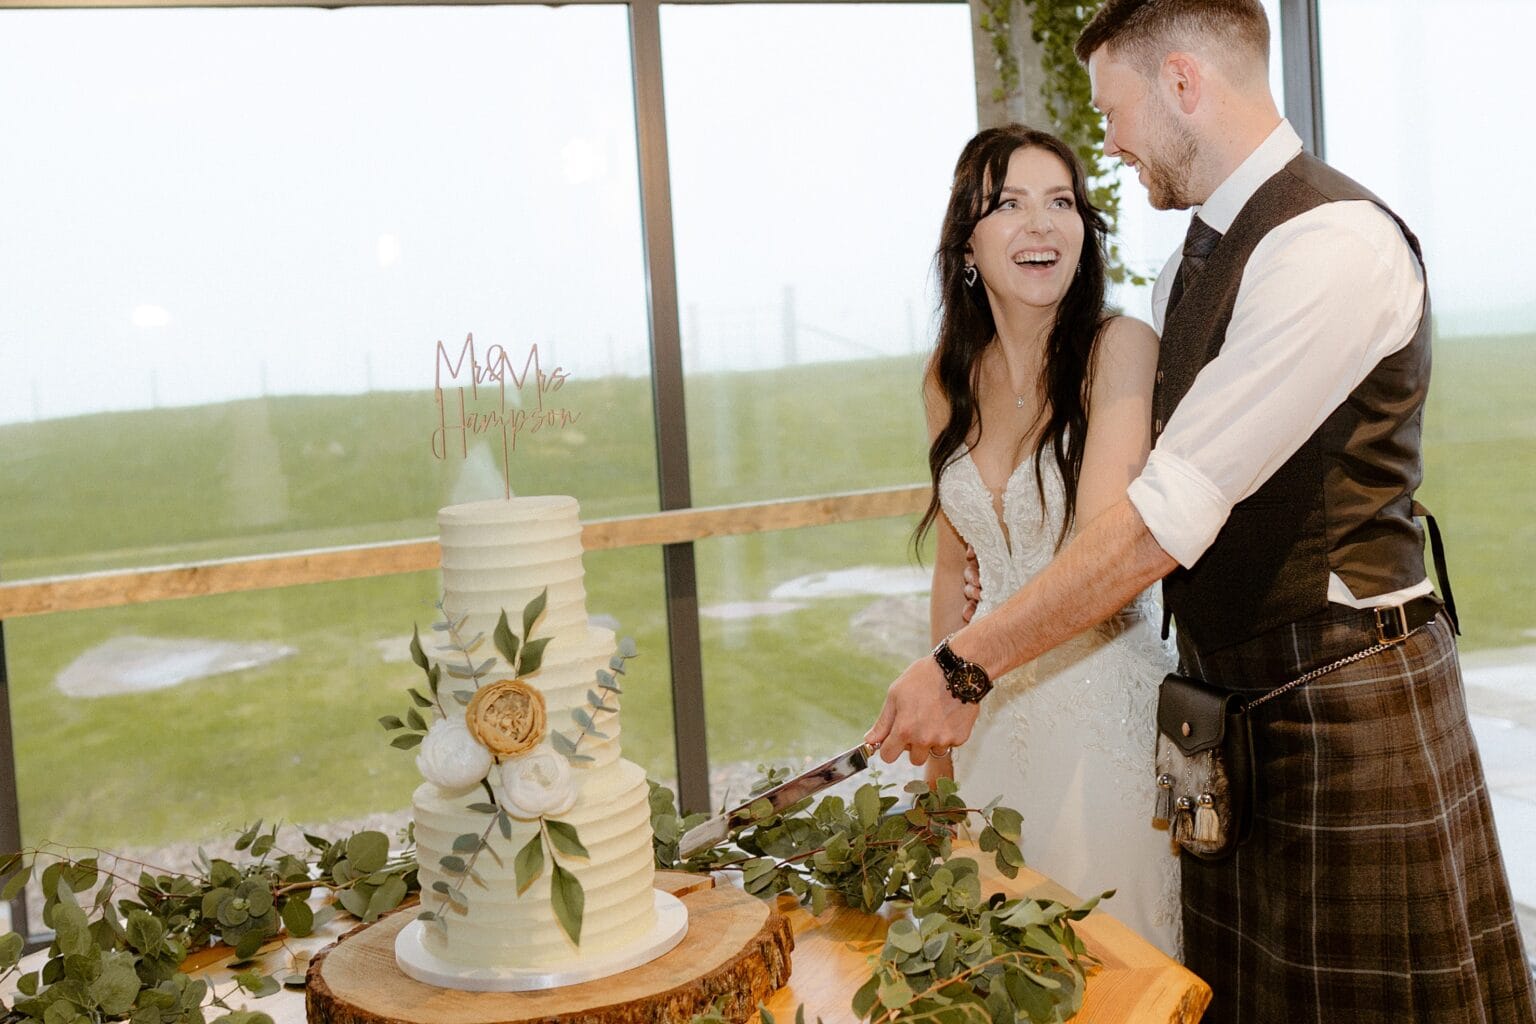 the bride and groom smile as they cut their wedding cake in front of a large window following their wedding ceremony at cairns farm estate kirknewton west lothian